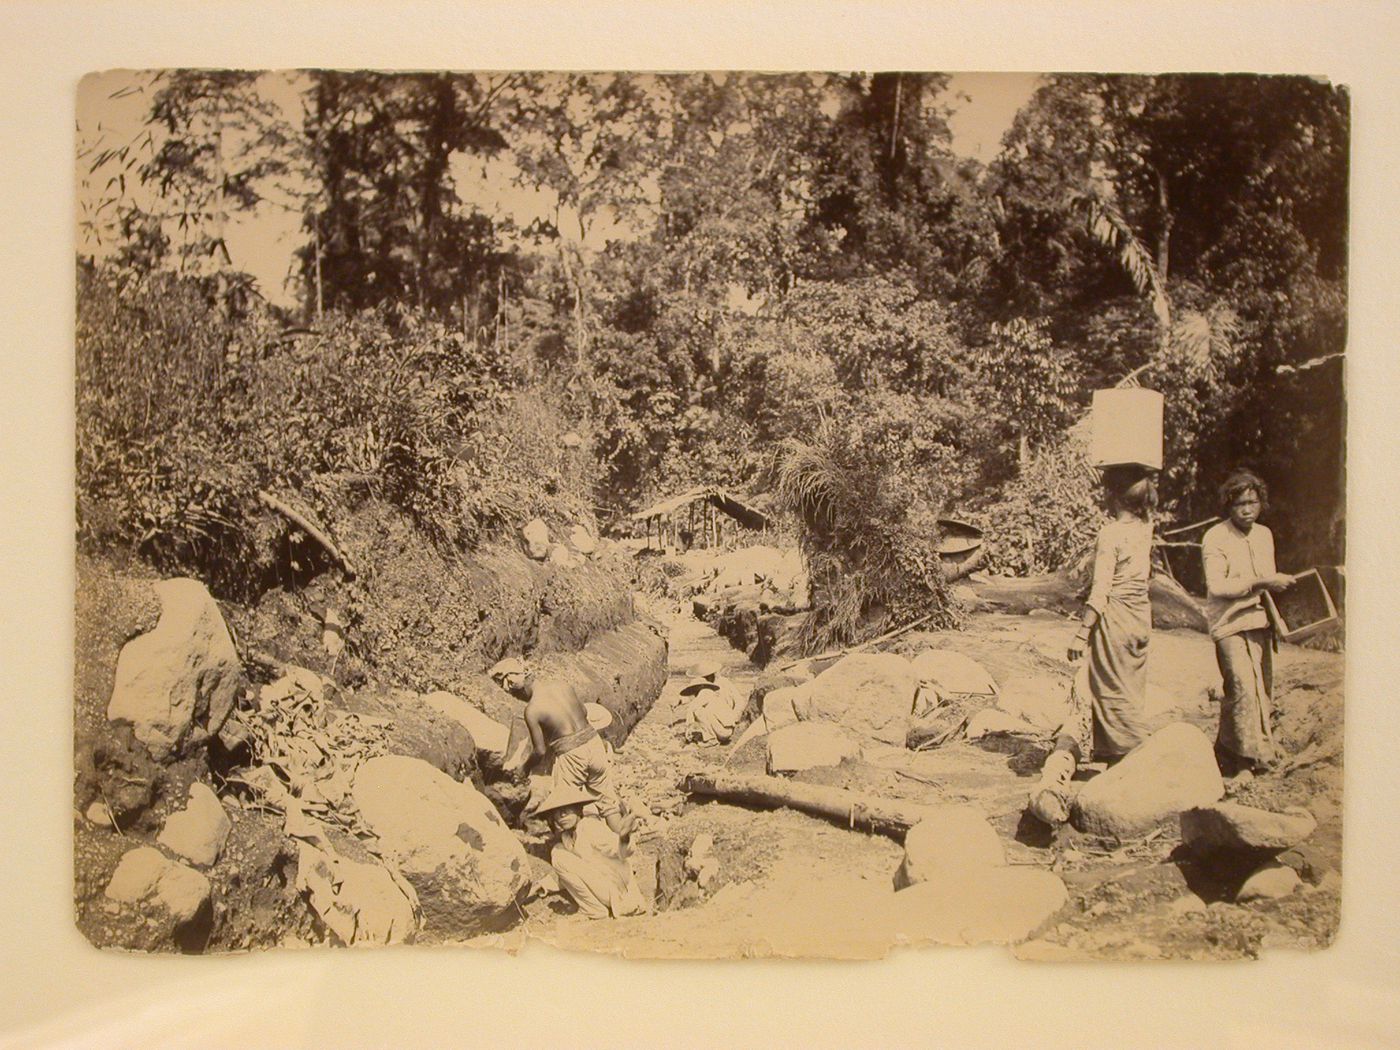 View of six people working in a trench surrounded by rocks, bush and trees